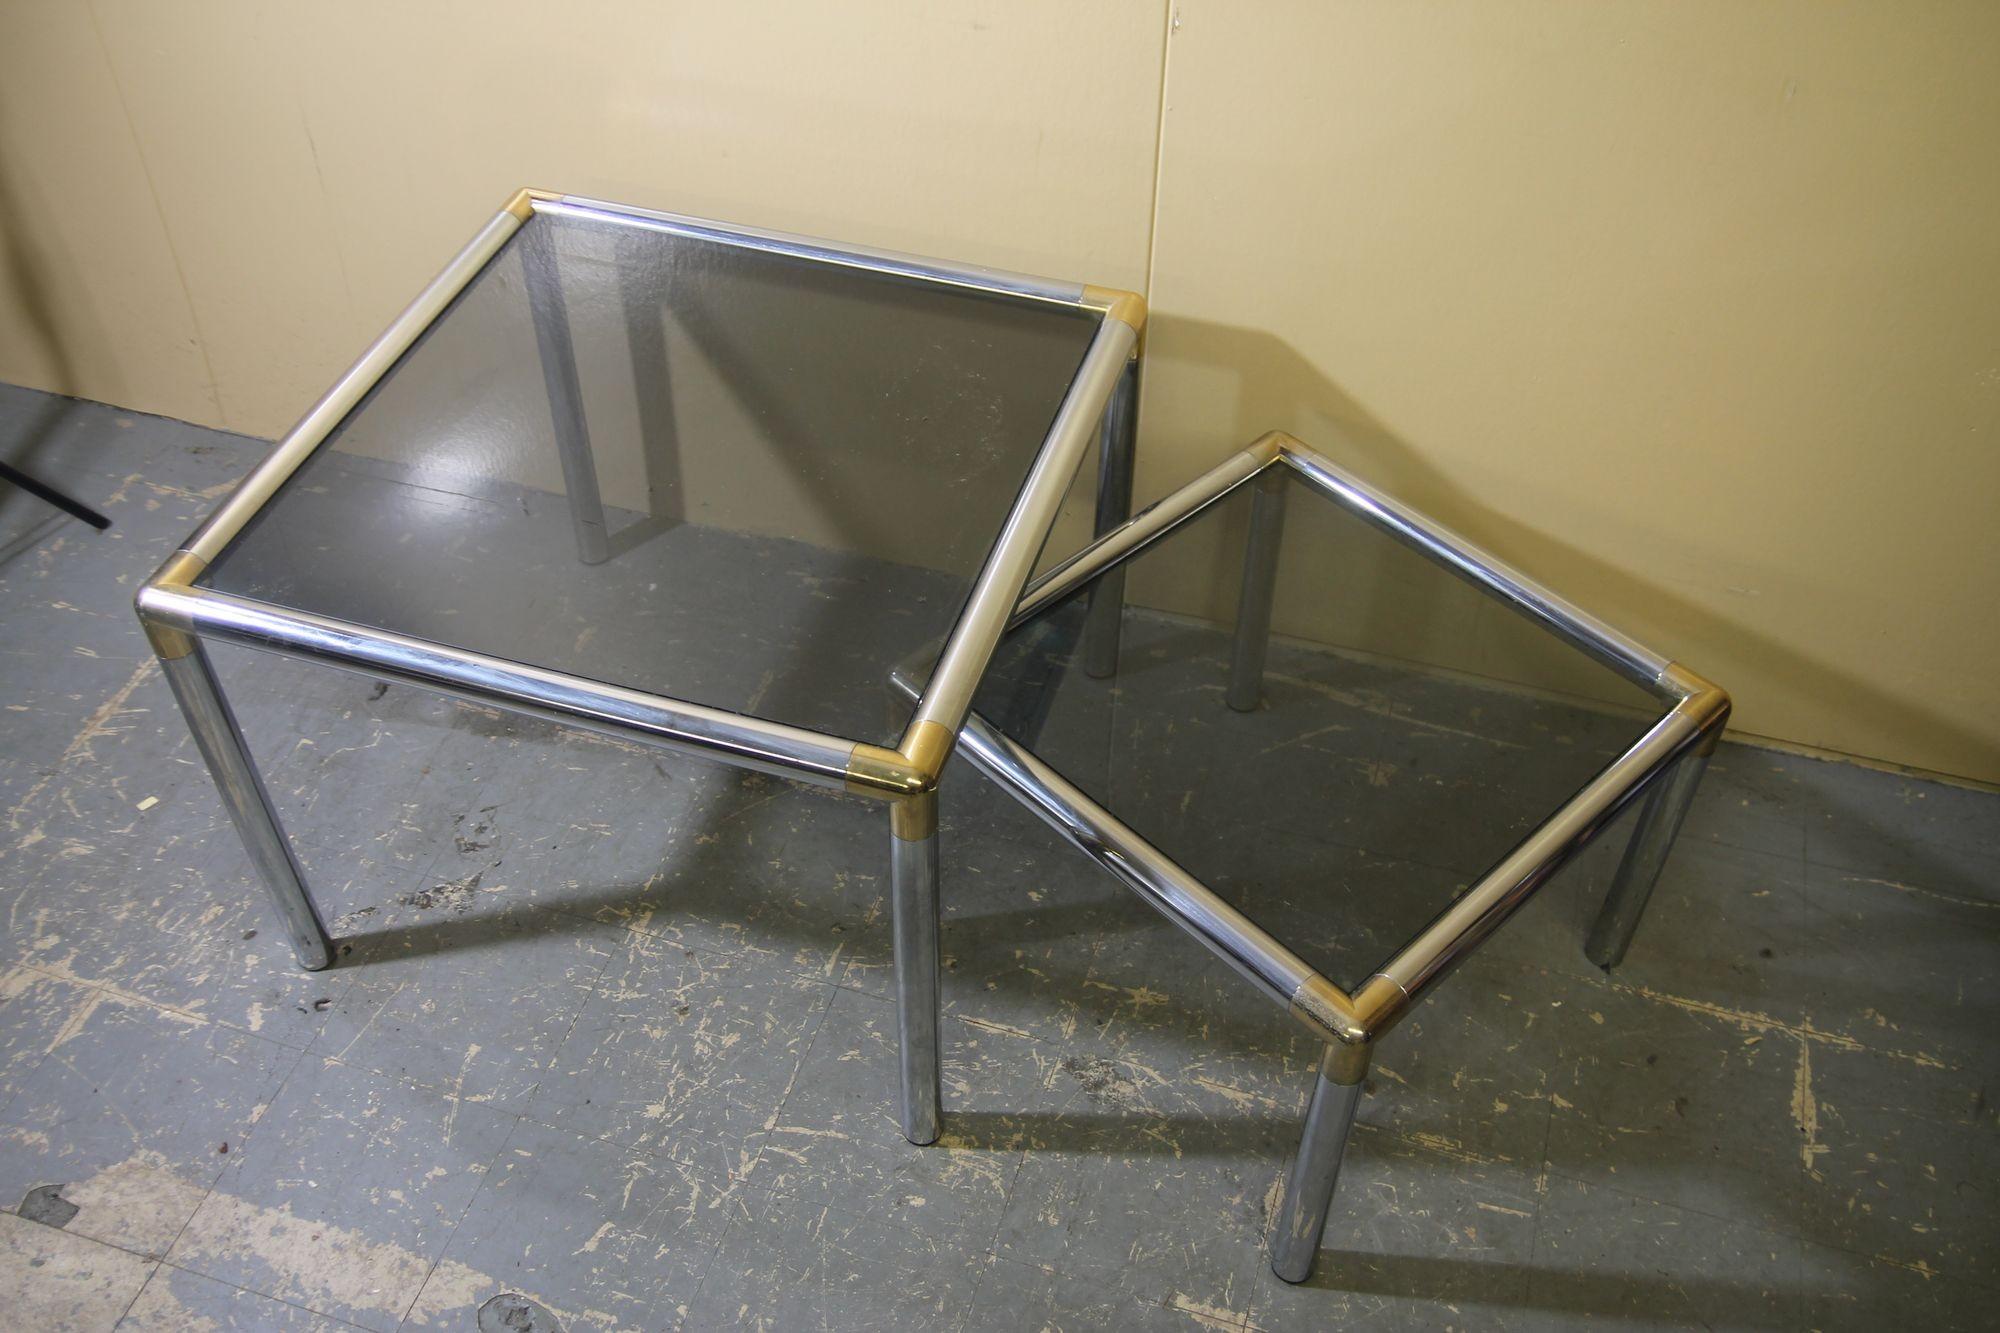 Nice set of chrome tables attributed to Milo Baughman. This simple design using chrome and smoke glass will look great in your mid century style home.
Large table is 27 x 27 x 20
Small table is 21 x 21 x 15